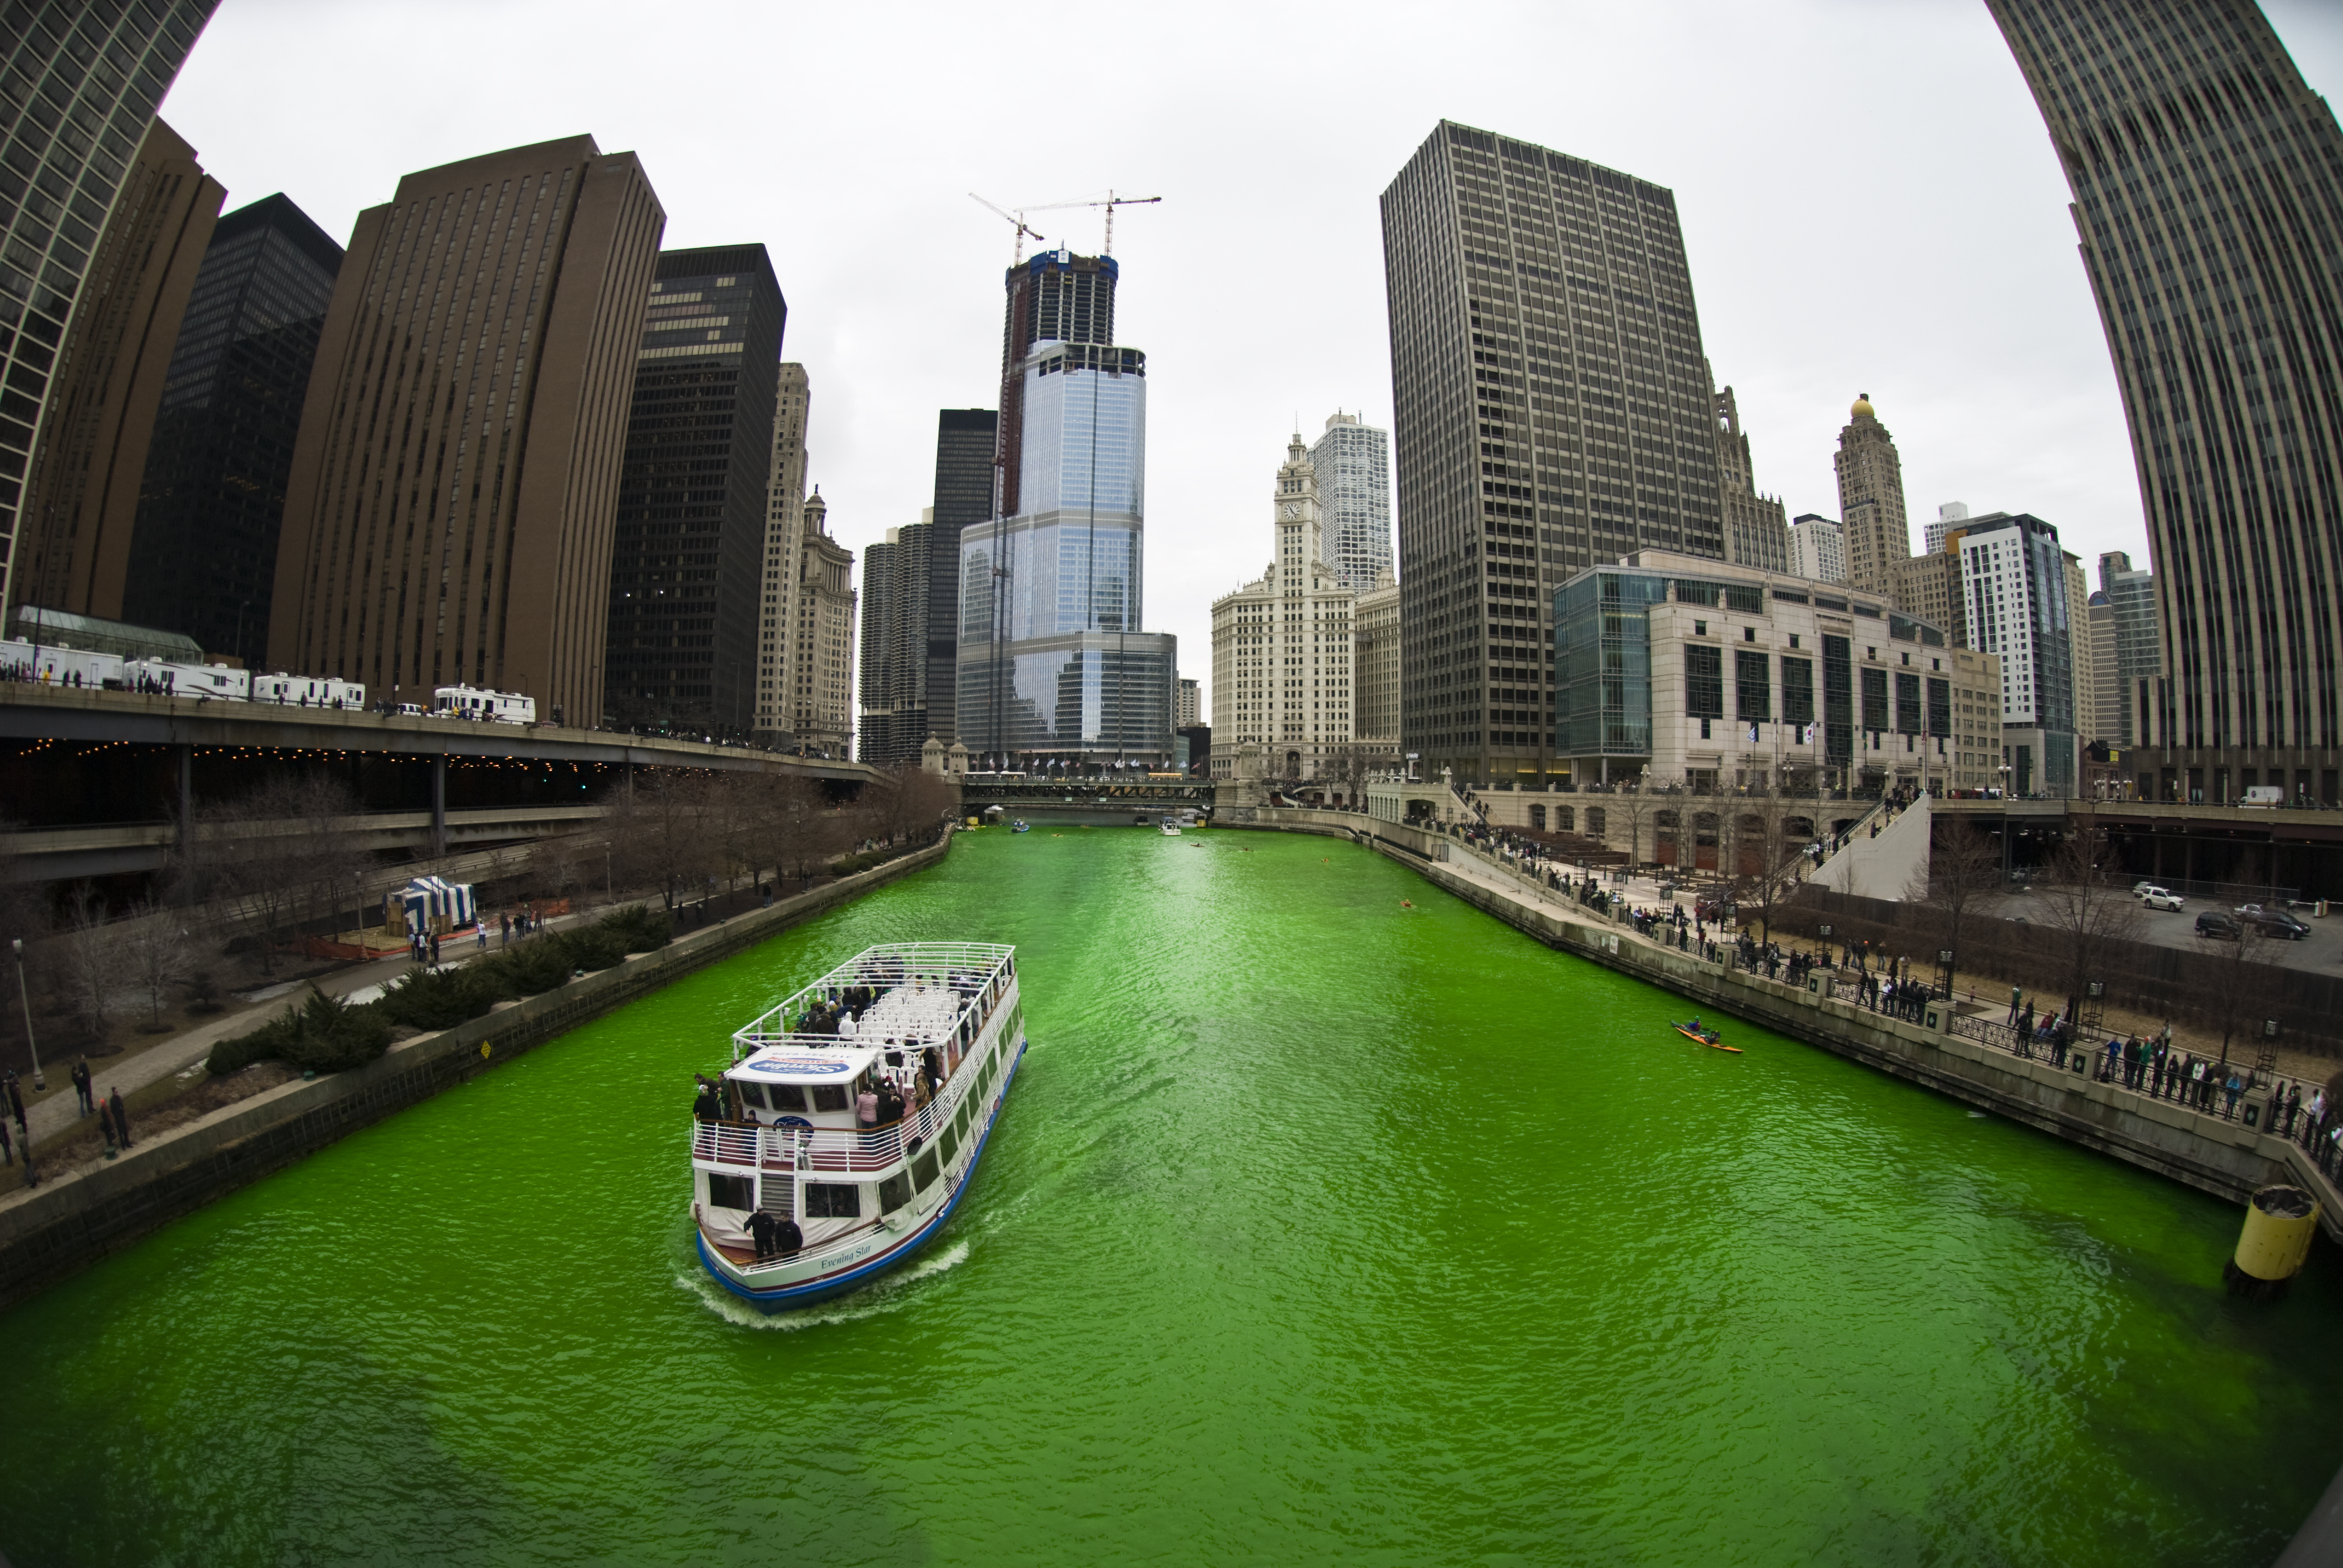 St. Patrick's Day: Why they began dyeing the Chicago River green : NPR